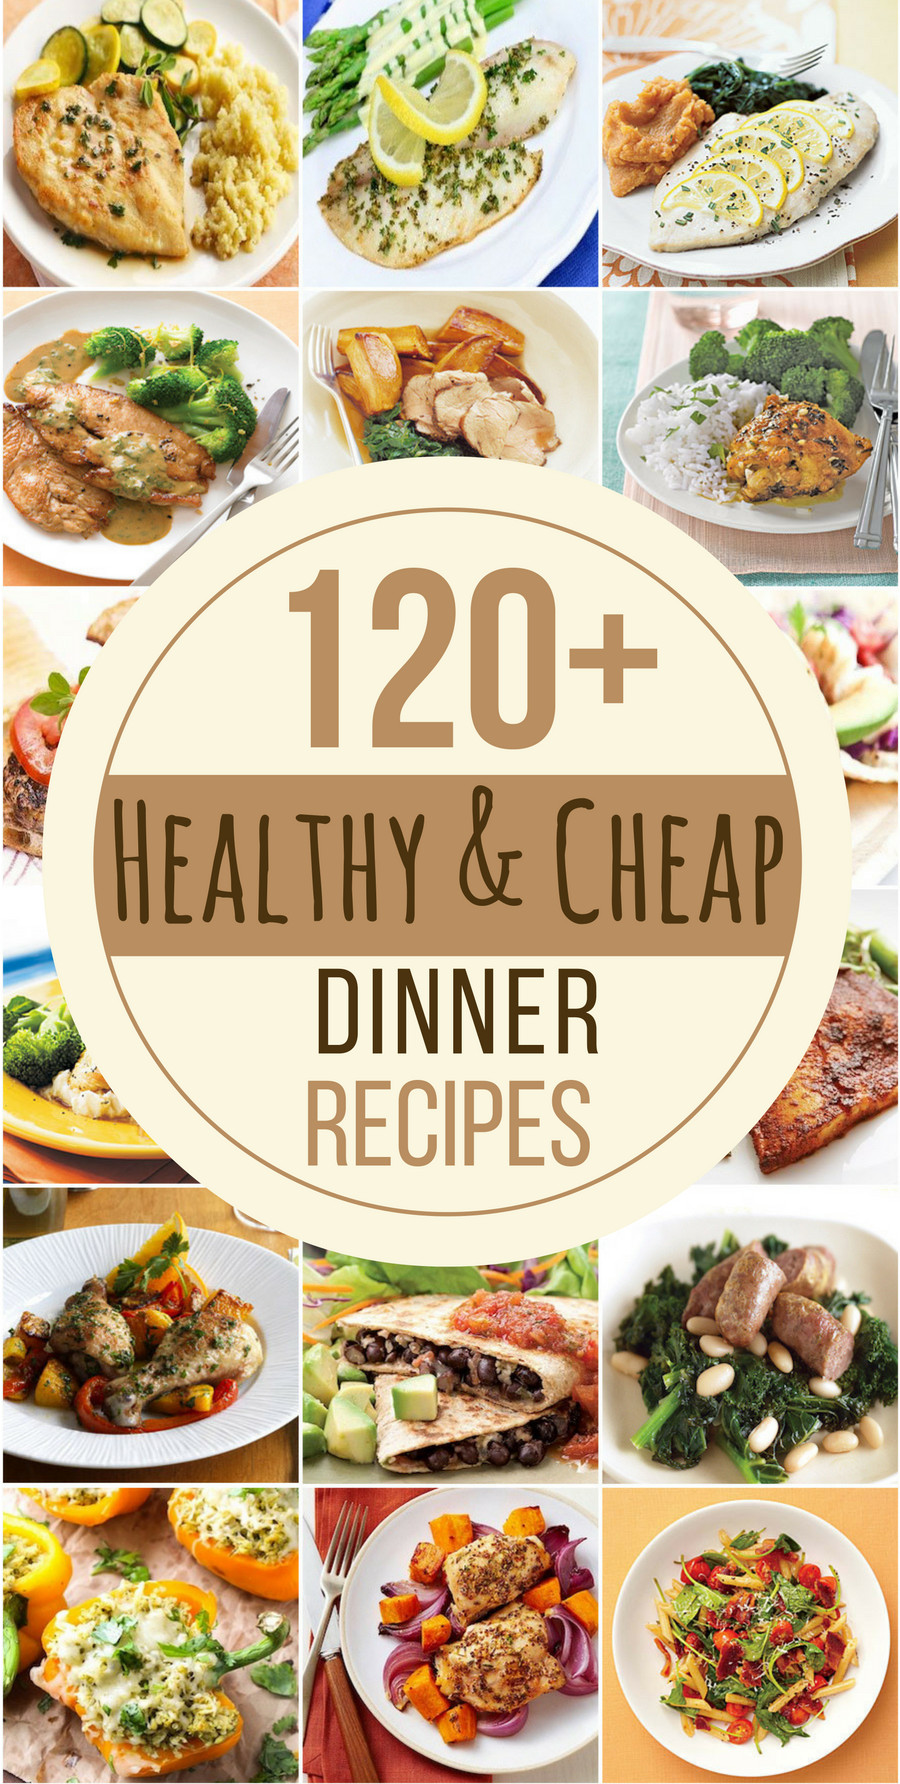 Healthy Affordable Dinners
 120 Healthy and Cheap Dinner Recipes Prudent Penny Pincher